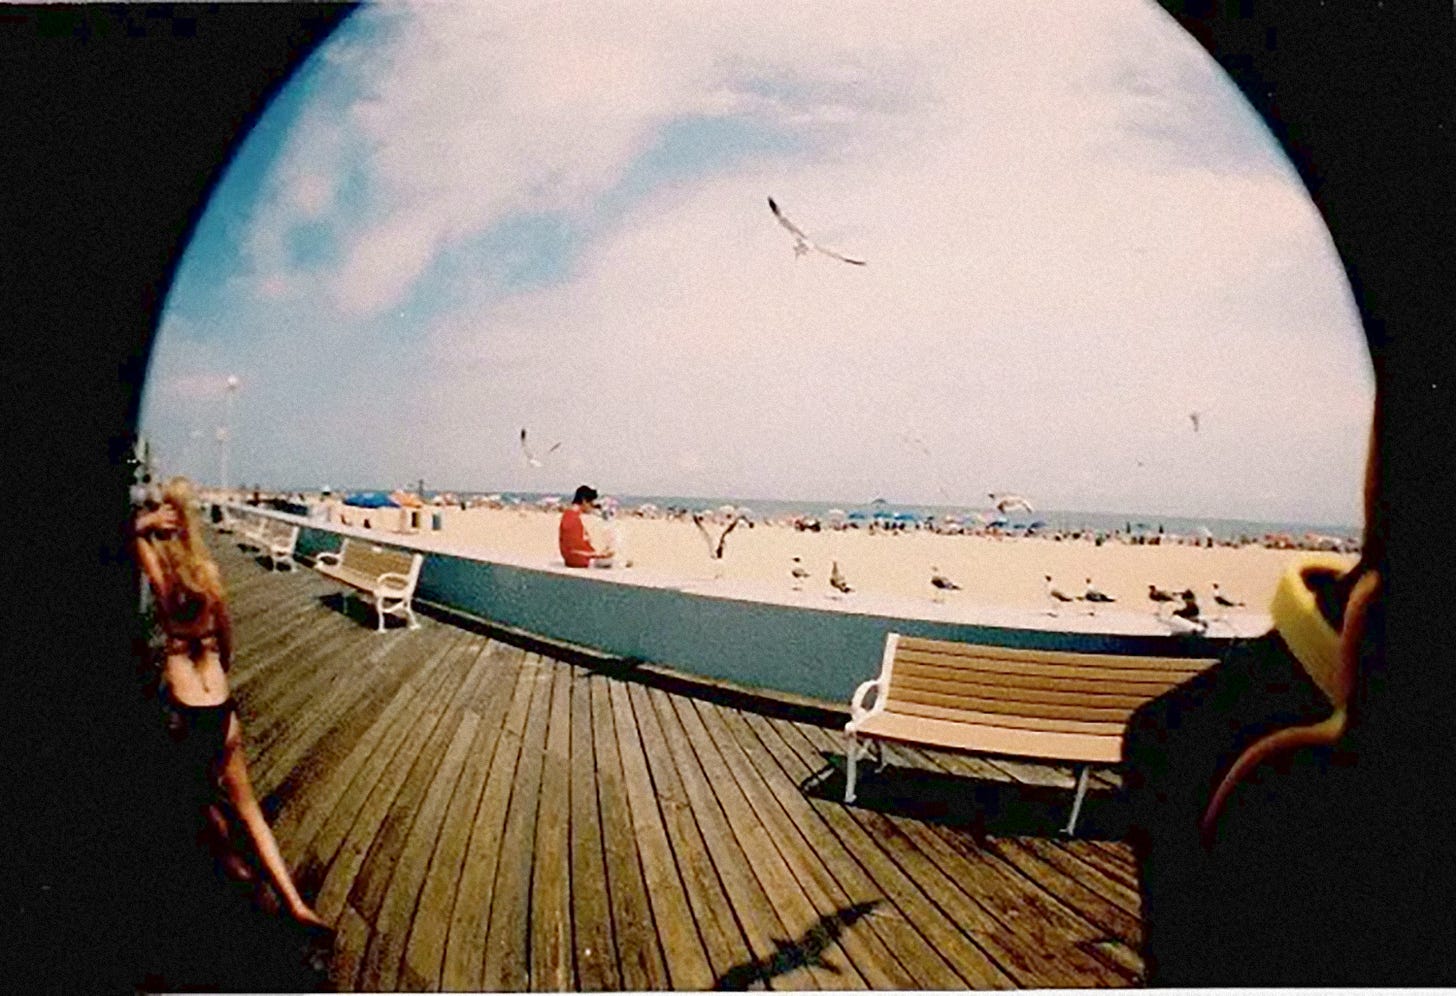 lomography fisheye 35mm snapshot showing a boardwalk and a seagull flying in the center. The seagulls shadow hits right at the bottom center of the photograph. The sky is bright blue and full of clouds. In the left corner, you can see a hint of a blond girl in a bathing suit walking away. In the right corner, you can see part of the photographer's hand and the bright yellow strap of the lomography fisheye camera.